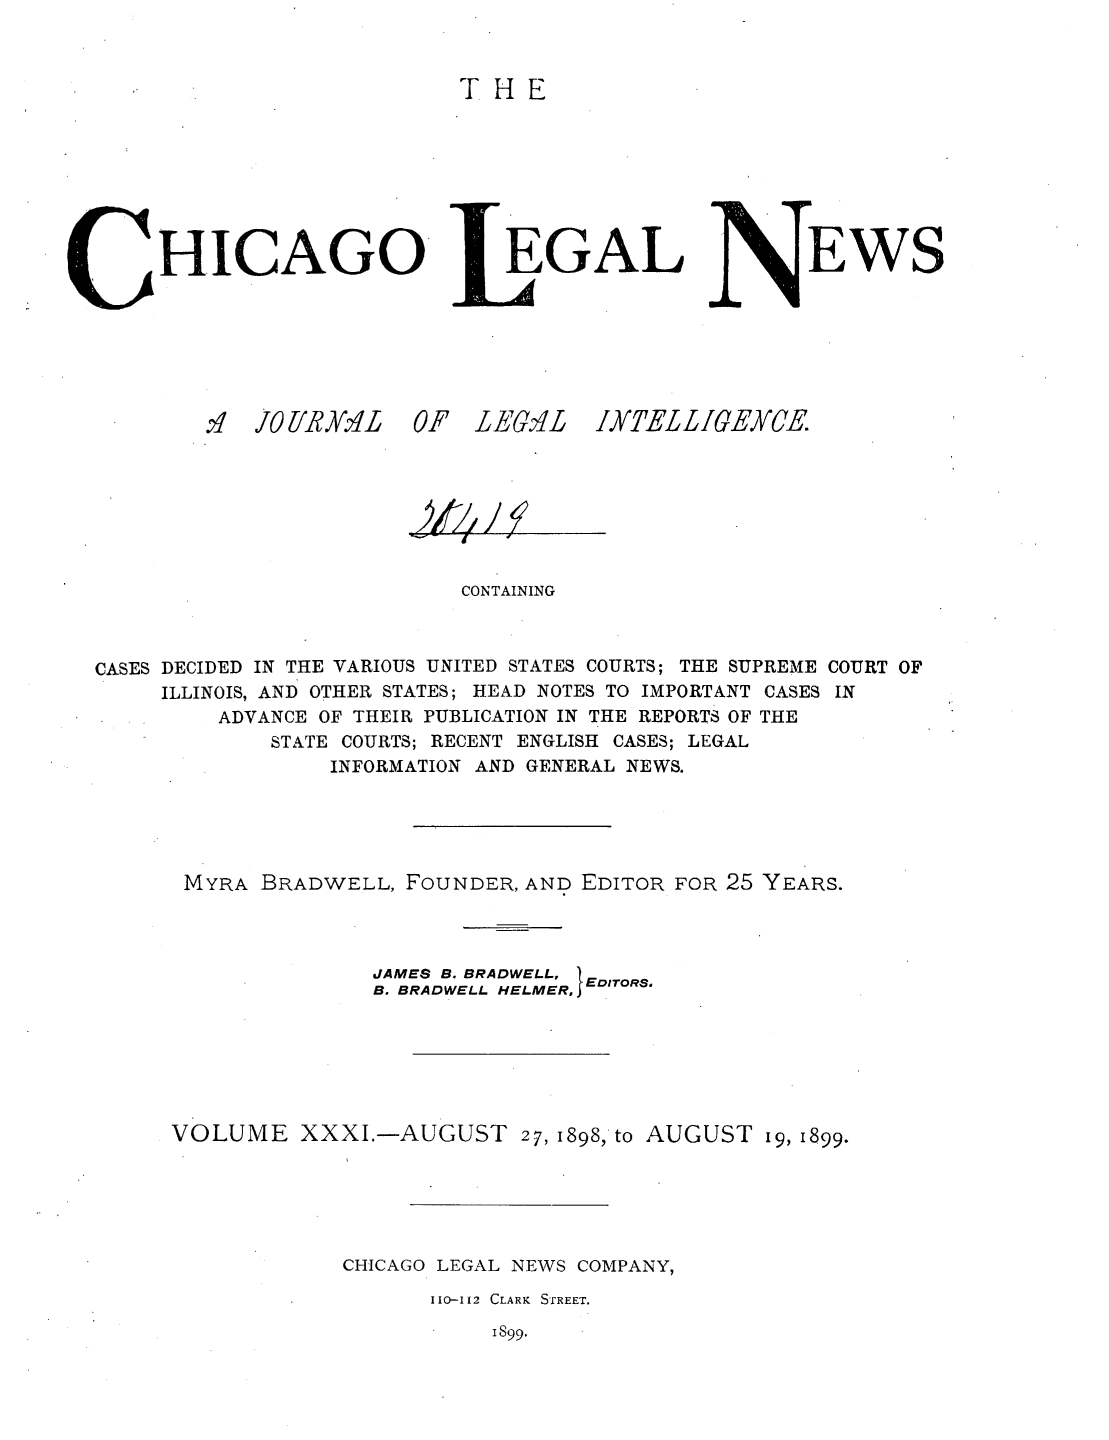 handle is hein.journals/chiclene31 and id is 1 raw text is: THEHICAGOq.U11RY.Y3L  0EGALF 1E7.LEWSOT//-CONTAININGCASES DECIDED IN THE VARIOUS UNITED STATES COURTS; THE SUPREME COURT OFILLINOIS, AND OTHER STATES; HEAD NOTES TO IMPORTANT CASES INADVANCE OF THEIR PUBLICATION IN THE REPORTS OF THESTATE COURTS; RECENT ENGLISH CASES; LEGALINFORMATION AND GENERAL NEWS.MYRA BRADWELL, FOUNDER, AND EDITOR FOR 25 YEARS.JAMES B. BRADWELL, EB. BRADWELL HELMER, EDITORS,VOLUME XXXI.-AUGUST 27, 1898, to AUGUST i9, 1899.CHICAGO LEGAL NEWS COMPANY,110-112 CLARK  STREET.I899.IK]EL L IGEYCE.